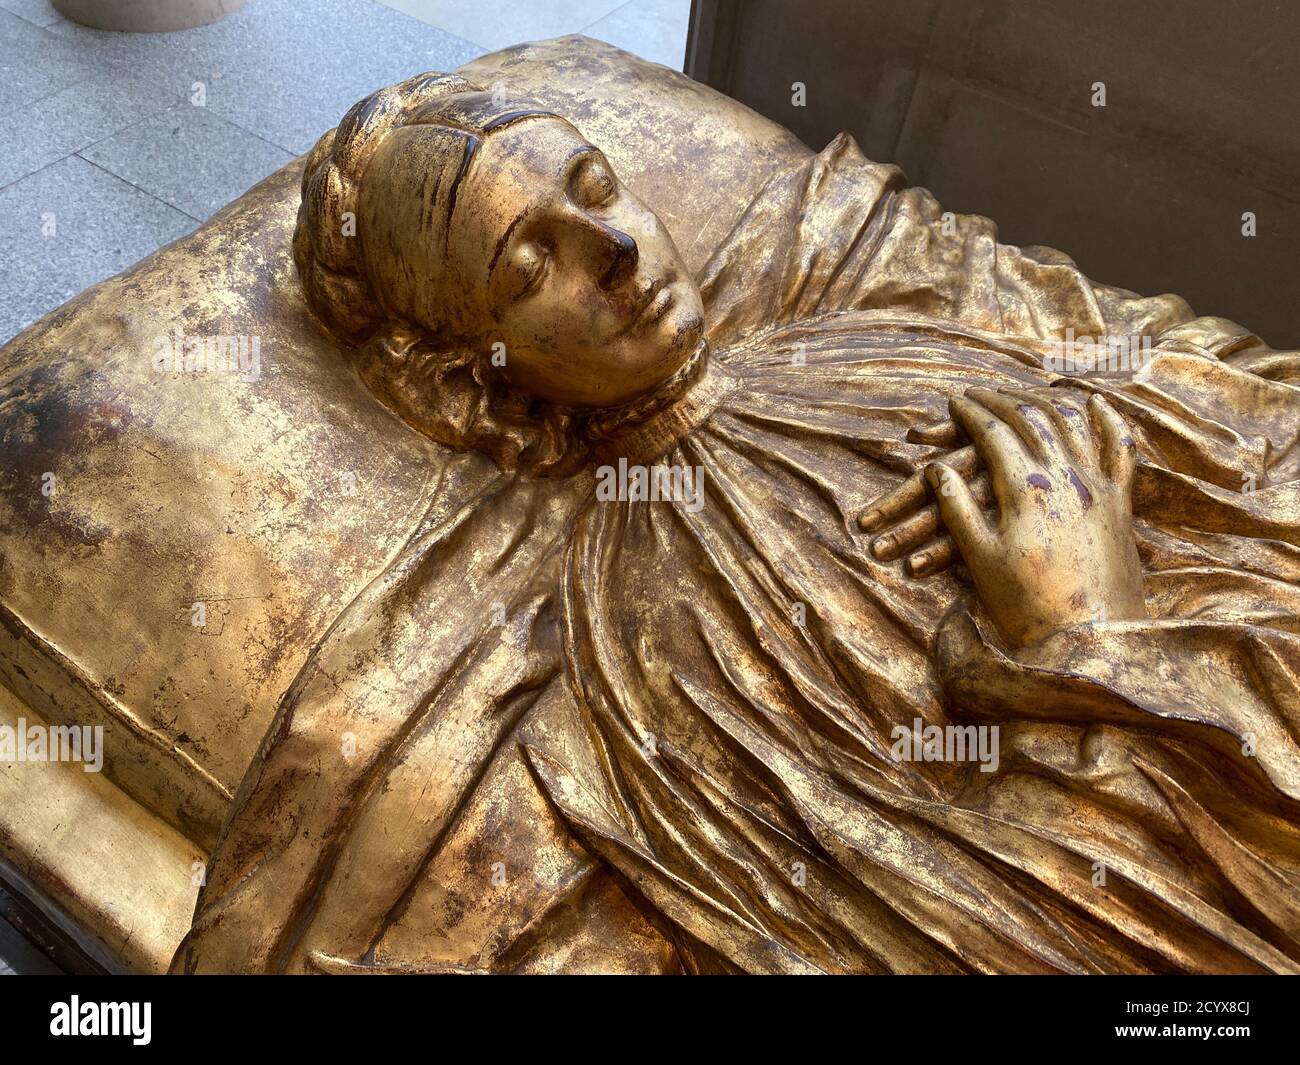 Tomb effigy of Elizabeth Boott Duveneck, 1891, this cast 1927, Gilt Bronze. After her death her bereaved husband the painter Frank Duveneck modeled a poignant funery monument reminiscent of Gothic and Renaissance tomb effigies. Metropolitan Museum of Art; American Wing. Stock Photo